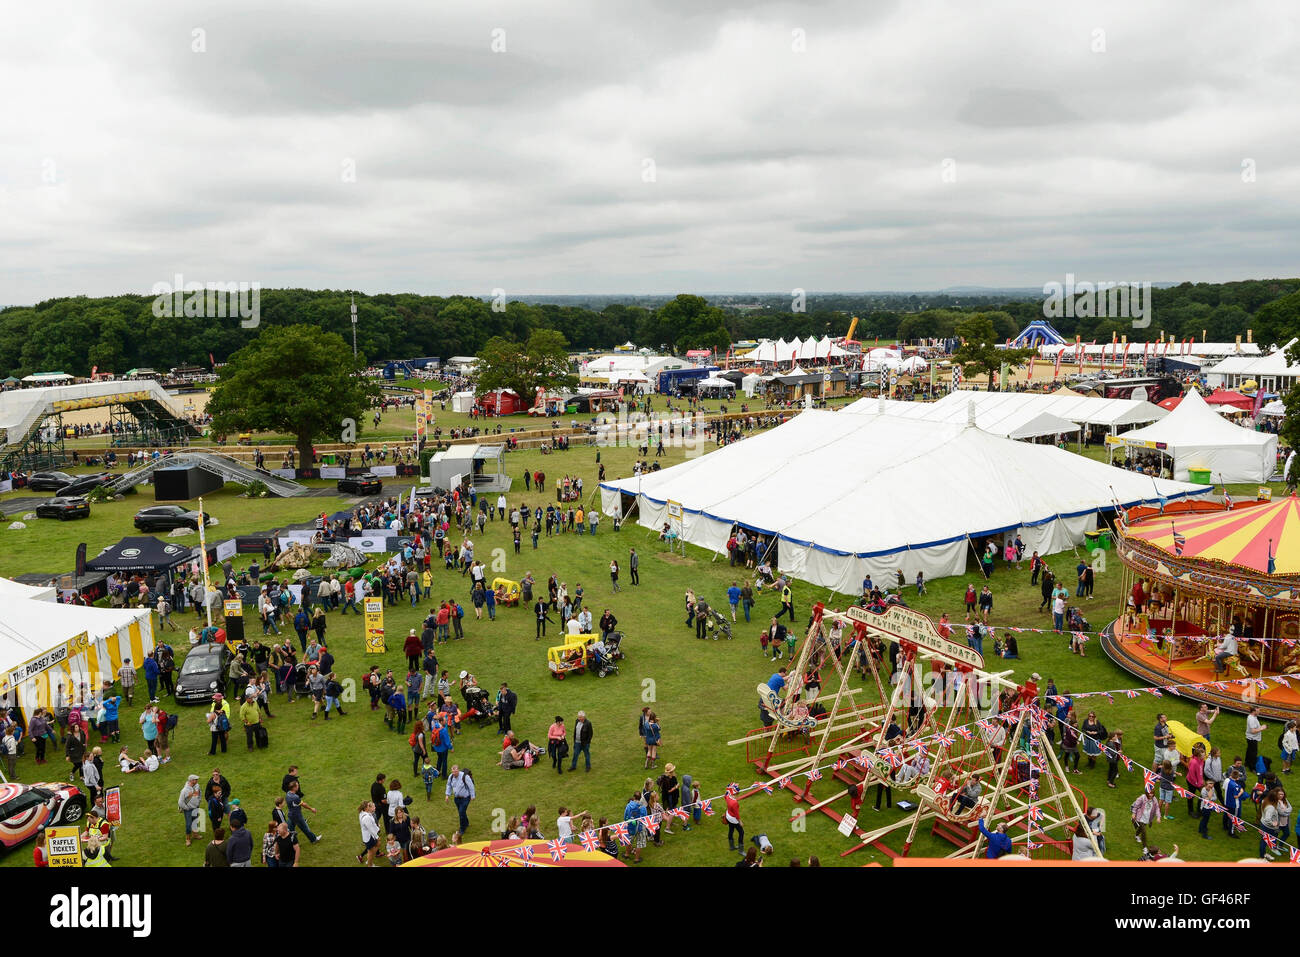 Bolesworth, Cheshire, UK. 29th July 2016. A panoramic view of the site. The event is the brainchild of Chris Evans and features 3 days of cars, music and entertainment with profits being donated to the charity Children in Need. Credit:  Andrew Paterson/Alamy Live News Stock Photo